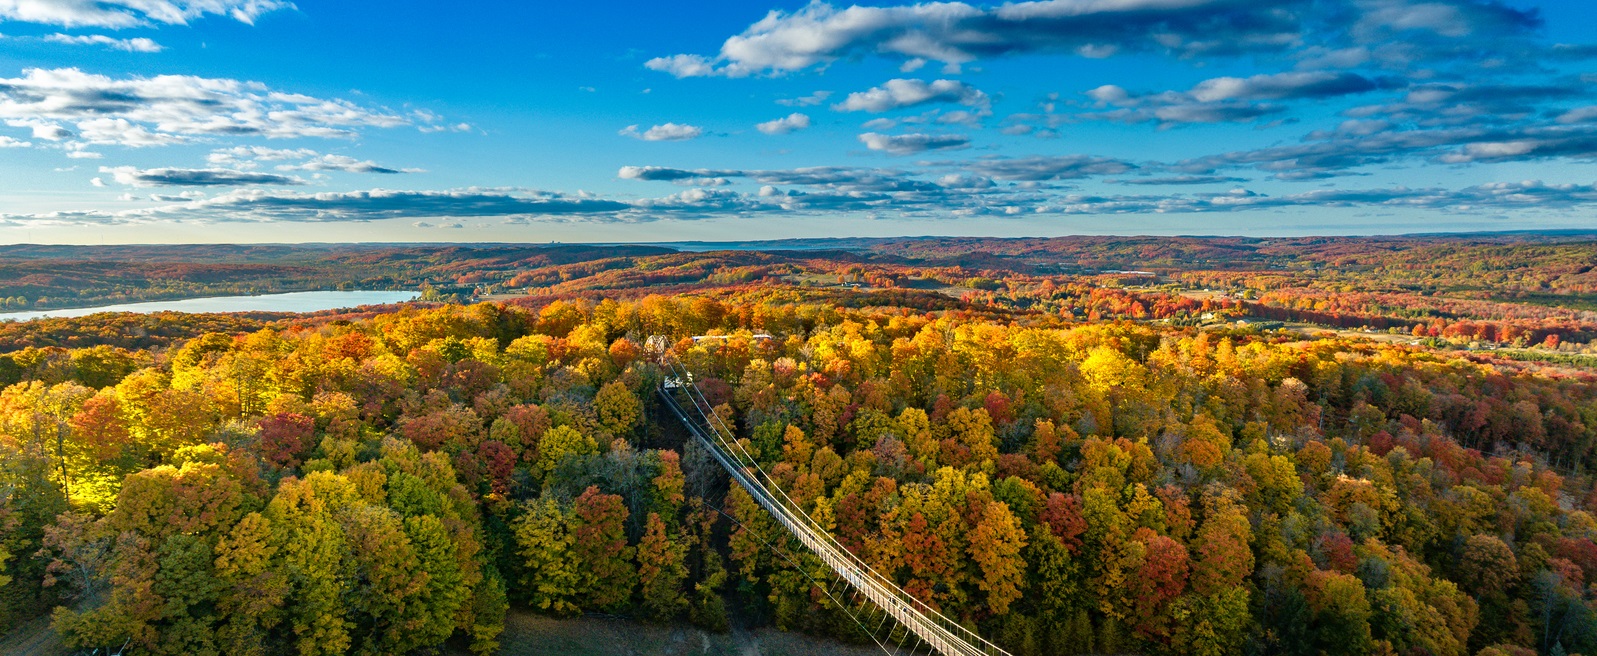 aerial drone picture of fall foliage and suspension bridge